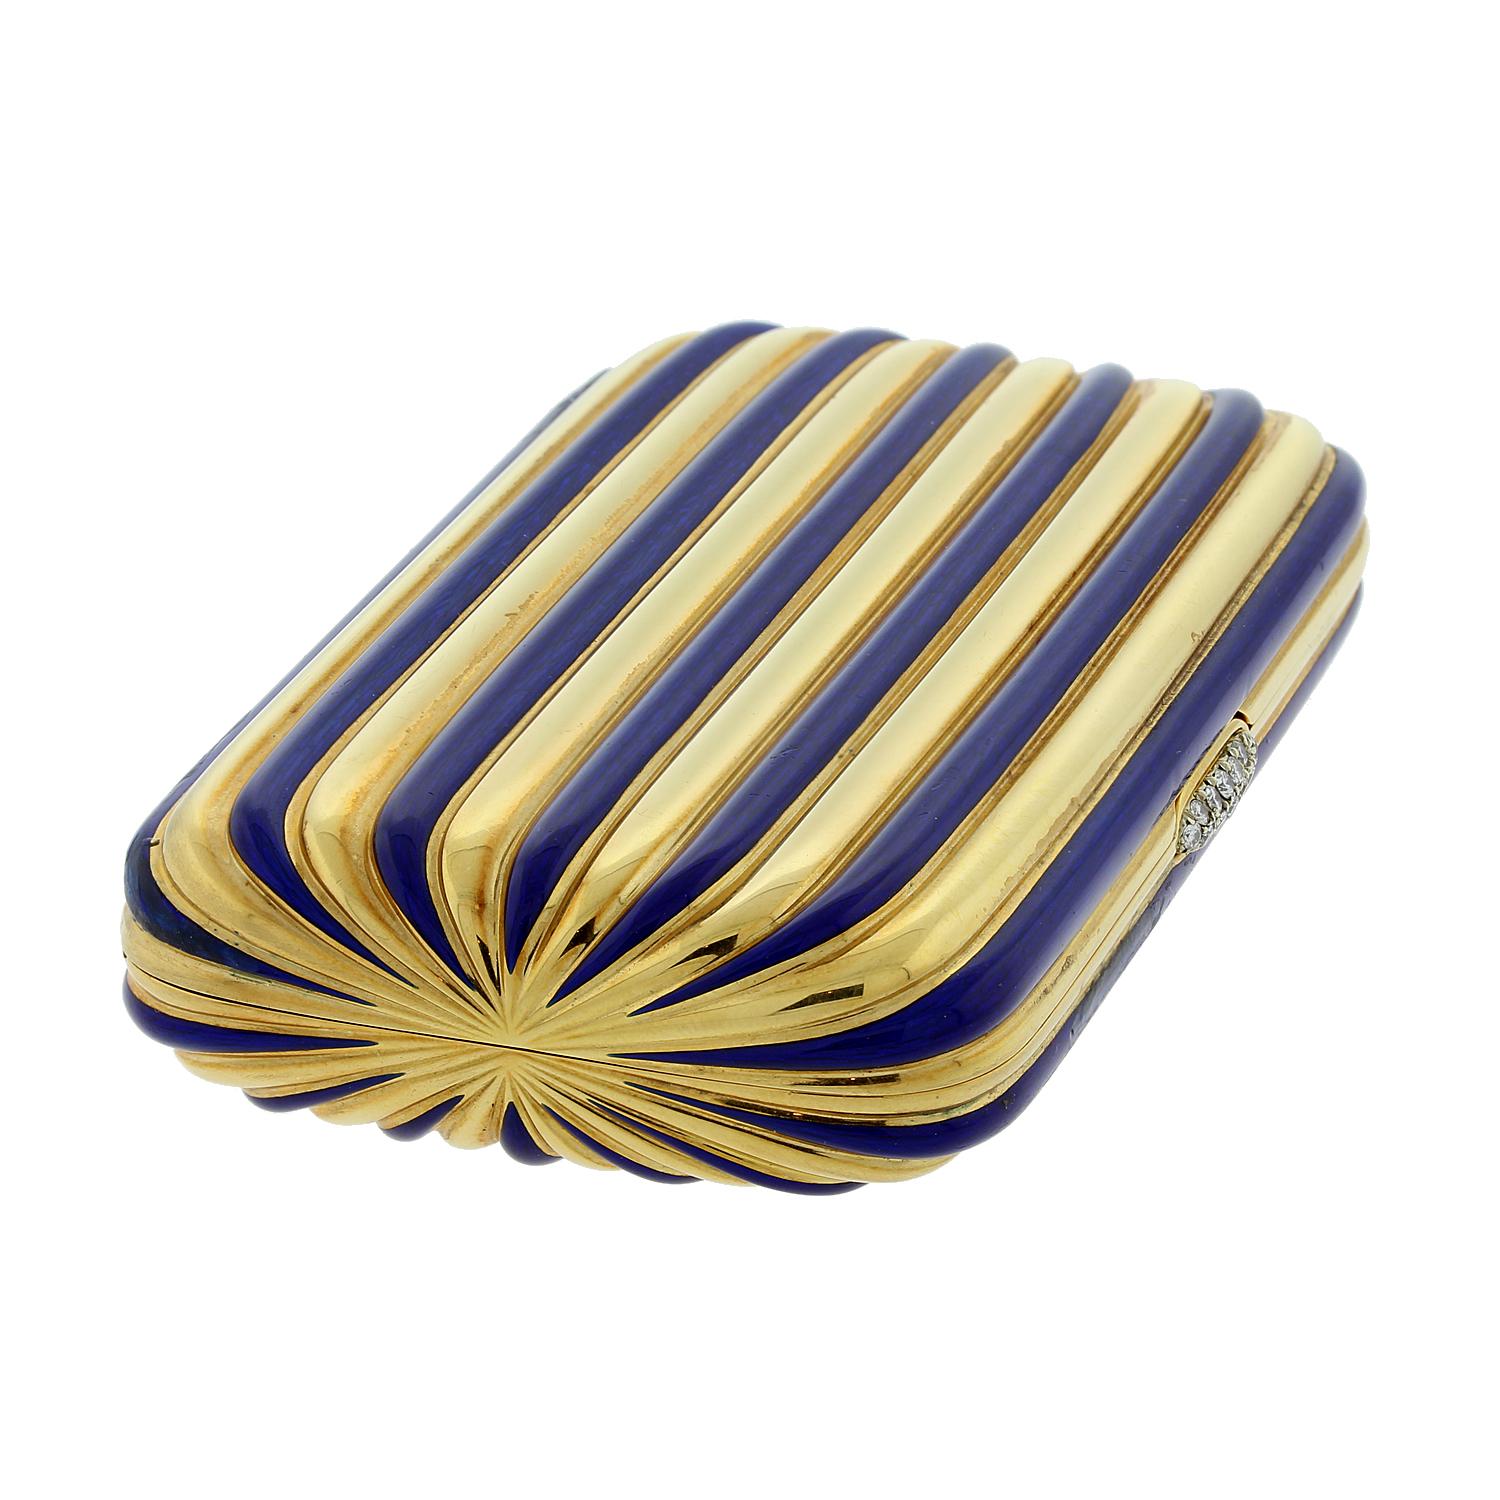 Vintage Diamond Gold Blue Enamel Stripes Multi-Use Case Compact In Excellent Condition For Sale In Beverly Hills, CA